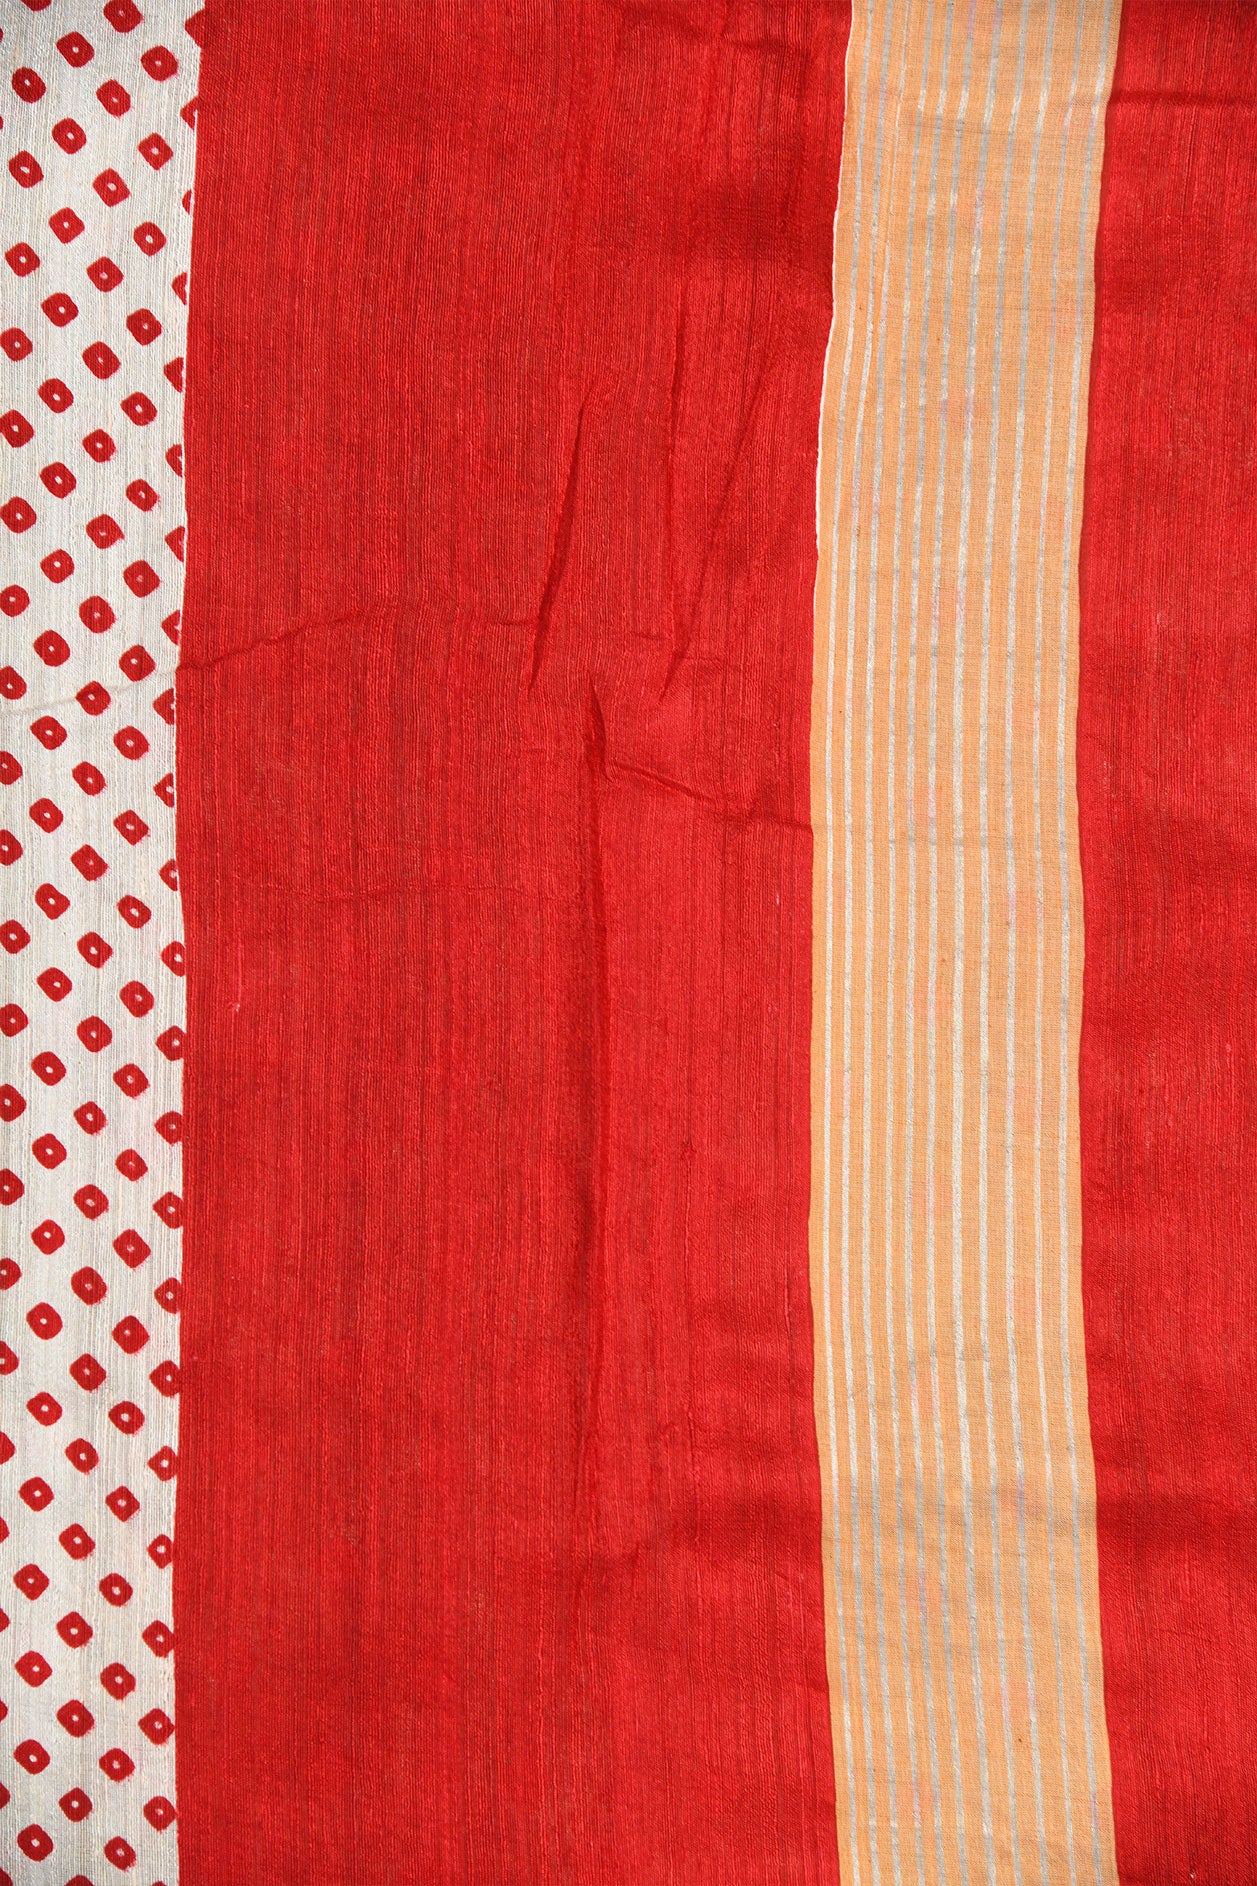 Silver Zari Border With Bandhani Printed Off White And Red Linen Tussar Saree